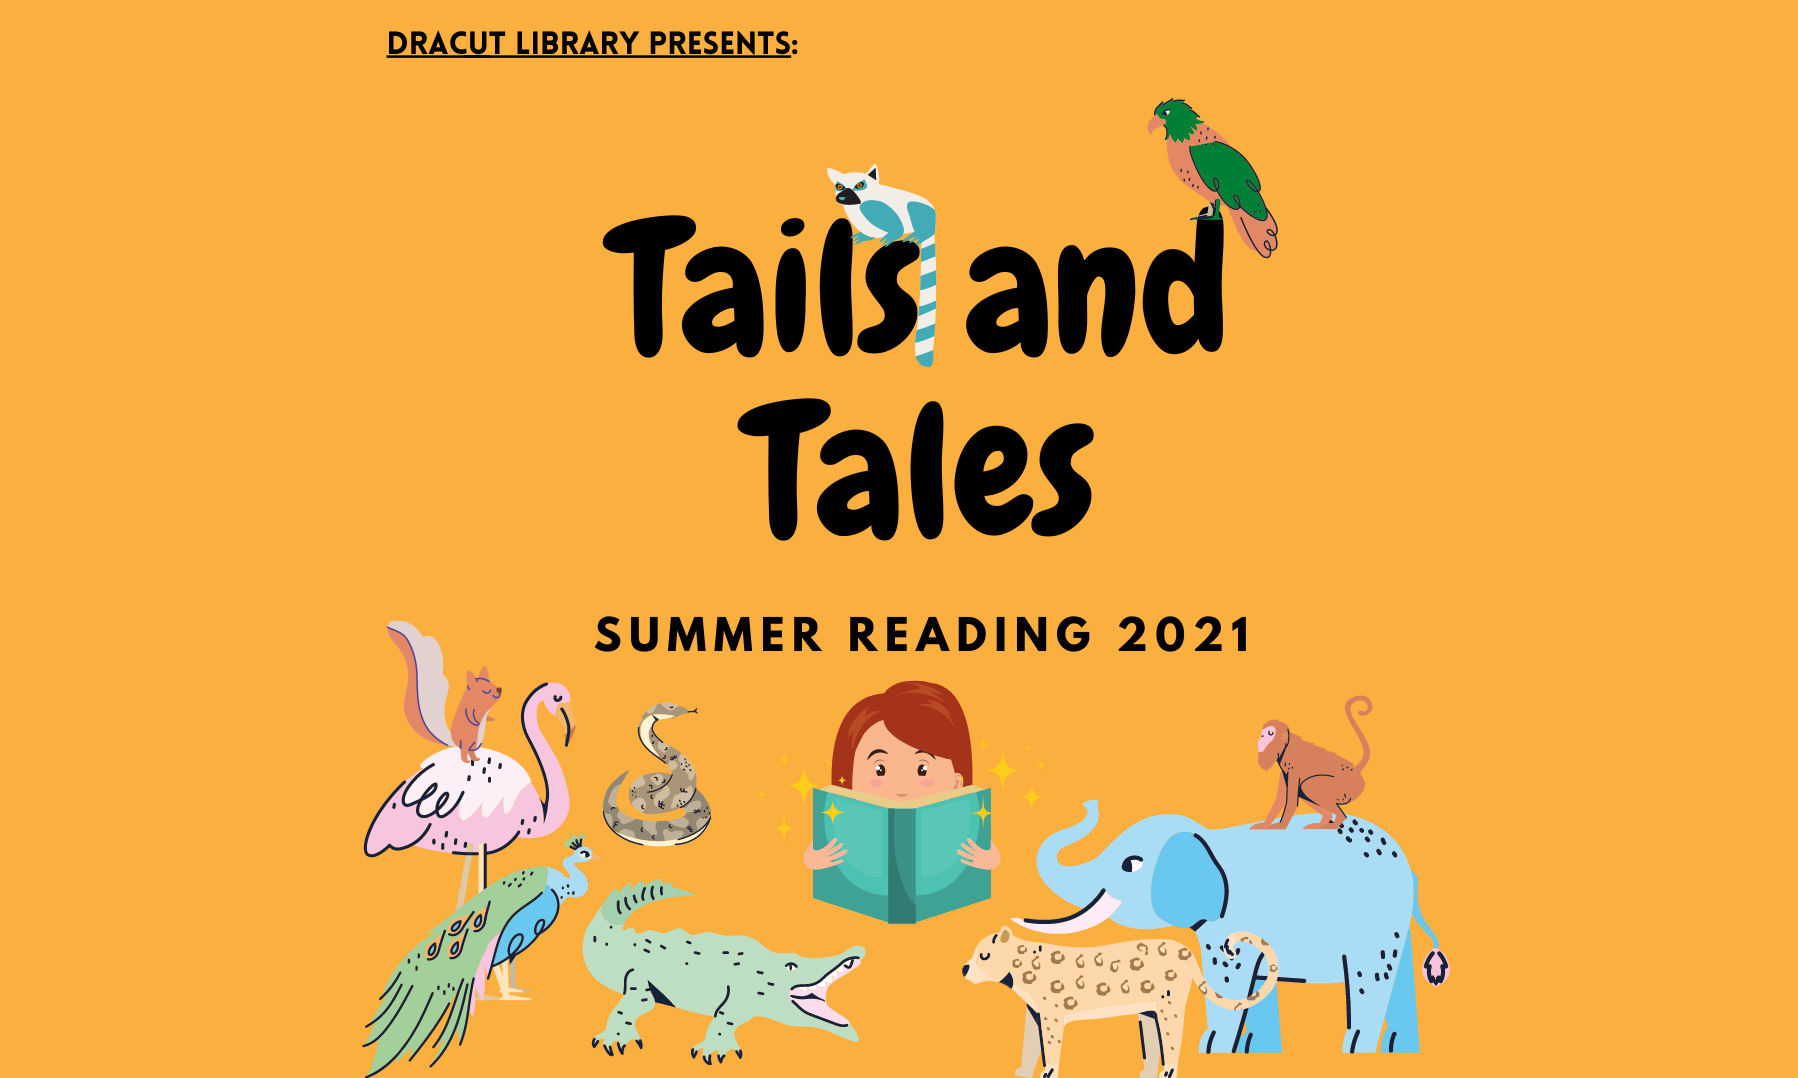 Words: Dracut Library Presents: Tails and Tales Summer Reading 2021 in black text on an orange background, surrounded by pictures of various animals.